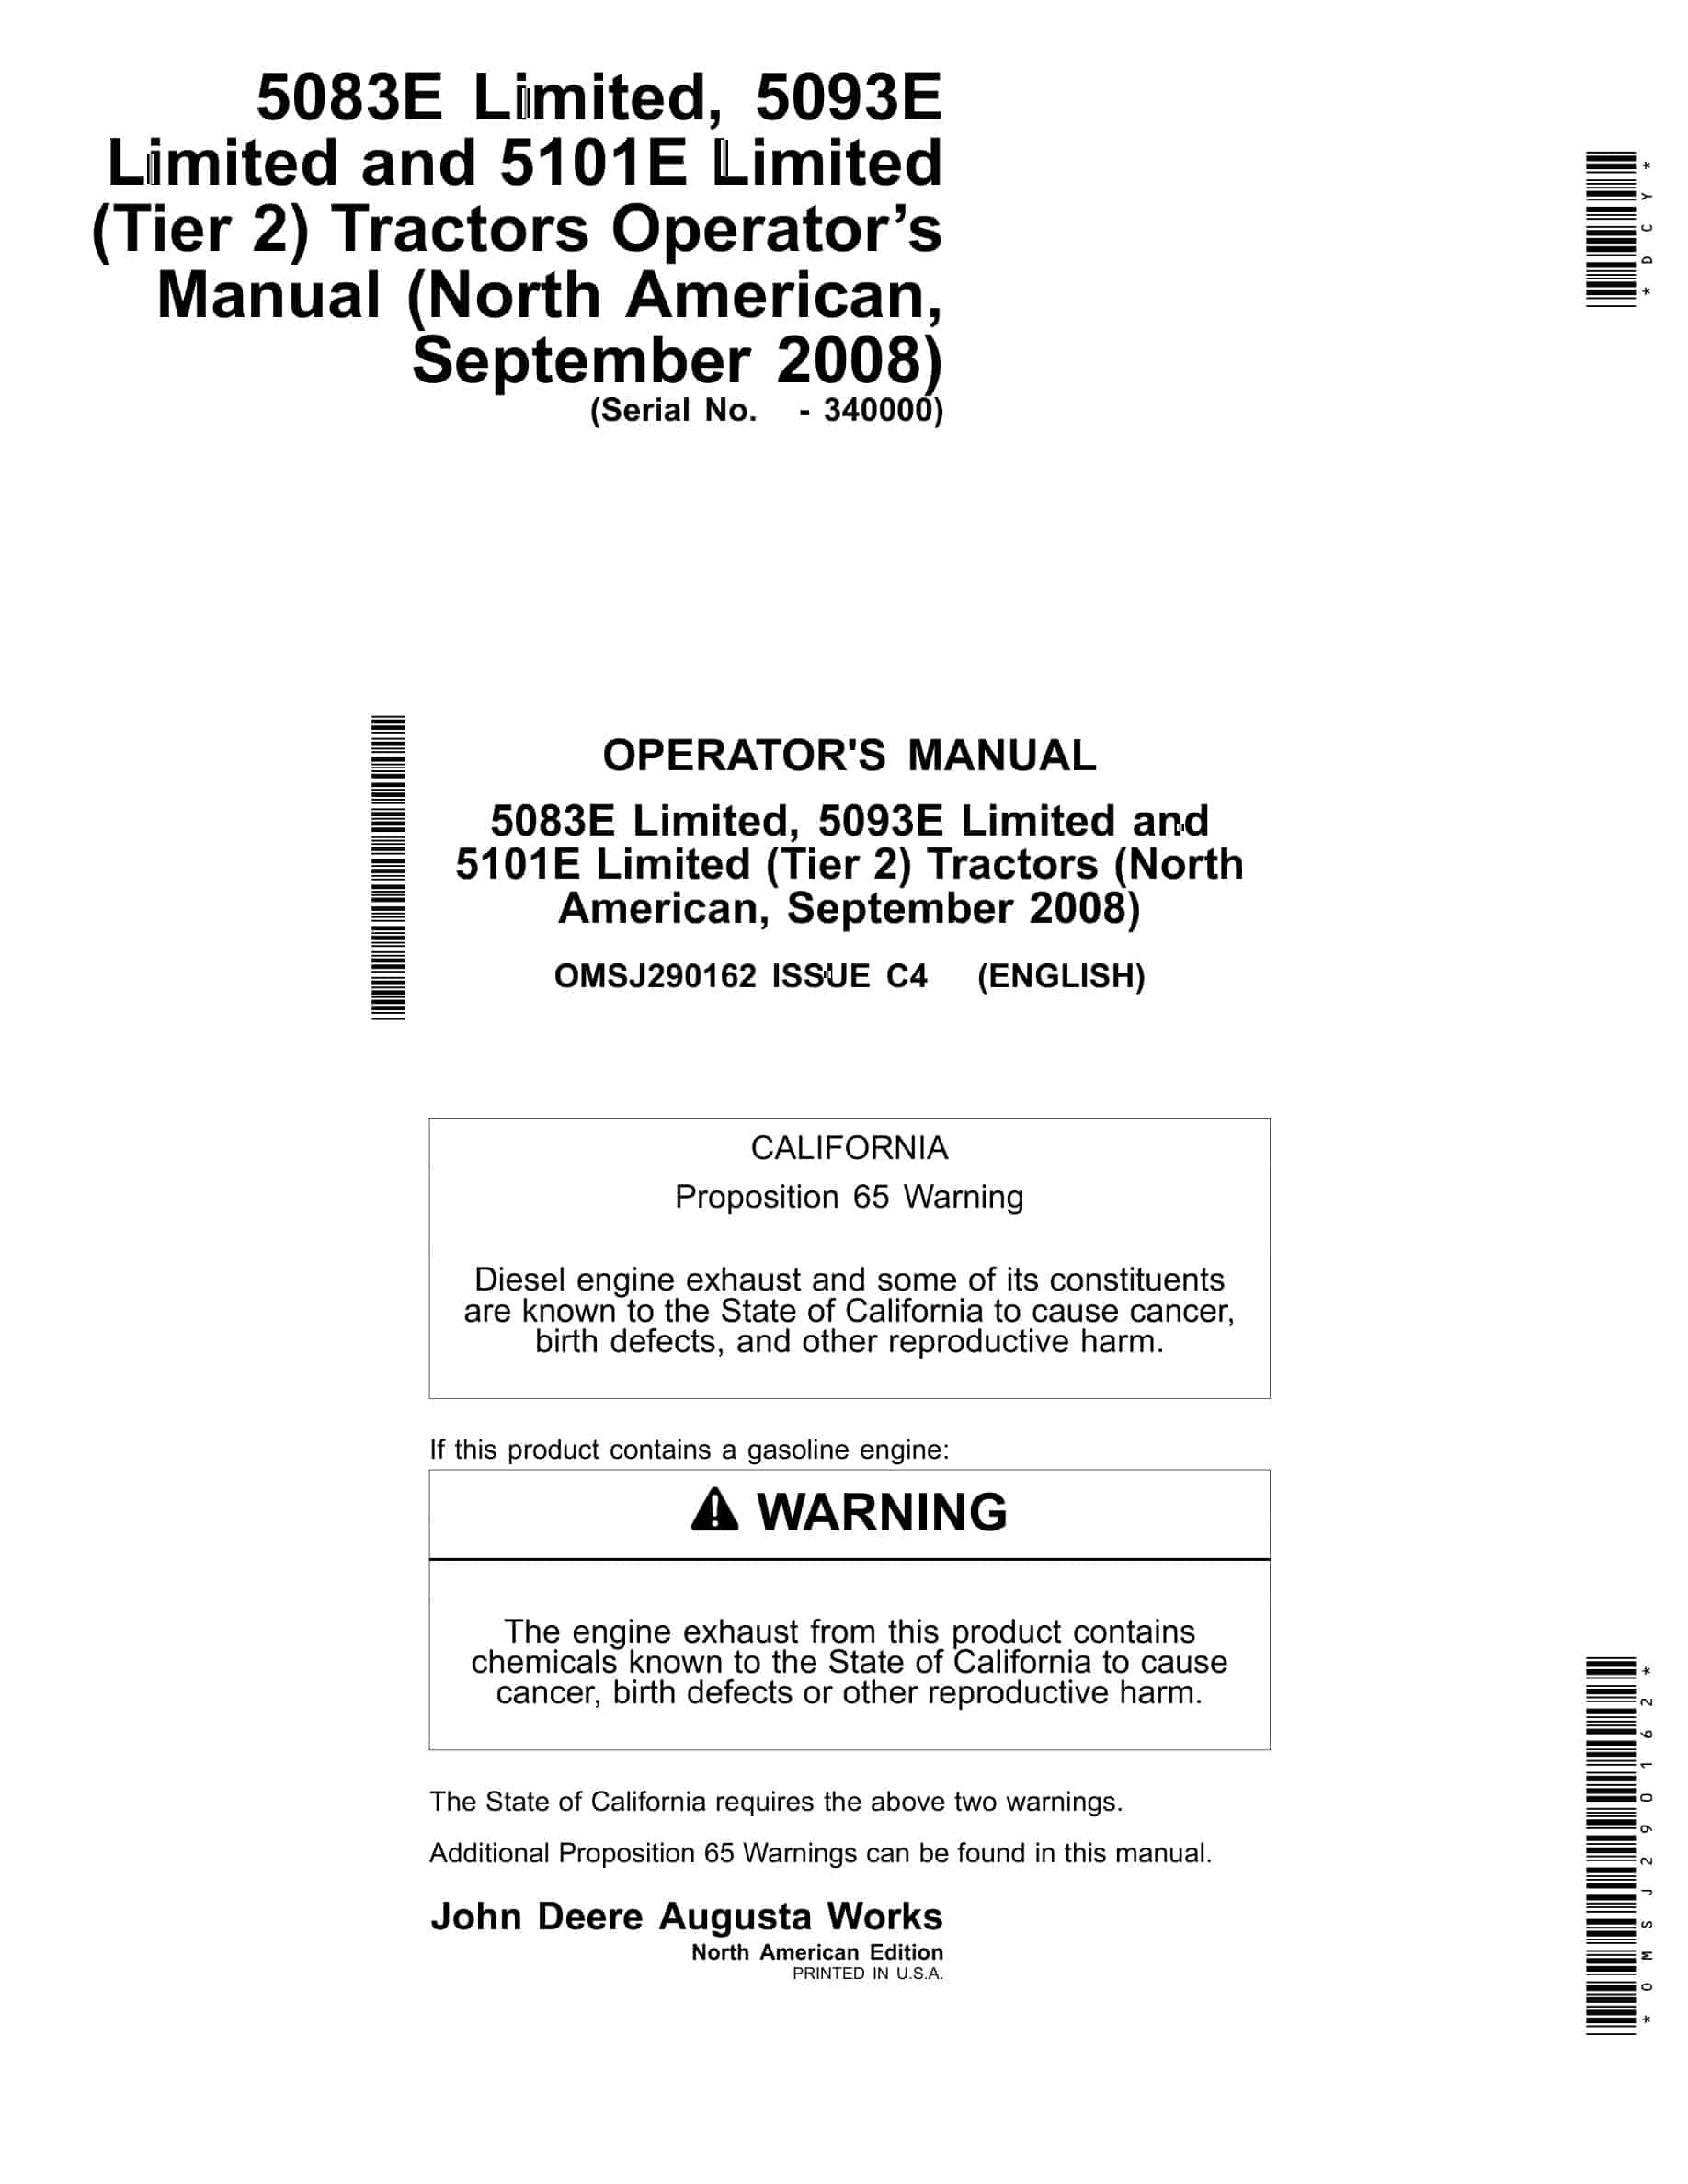 John Deere 5083E Limited, 5093E Limited and 5101E Limited (Tier 2) Tractor Operator Manual OMSJ290162-1